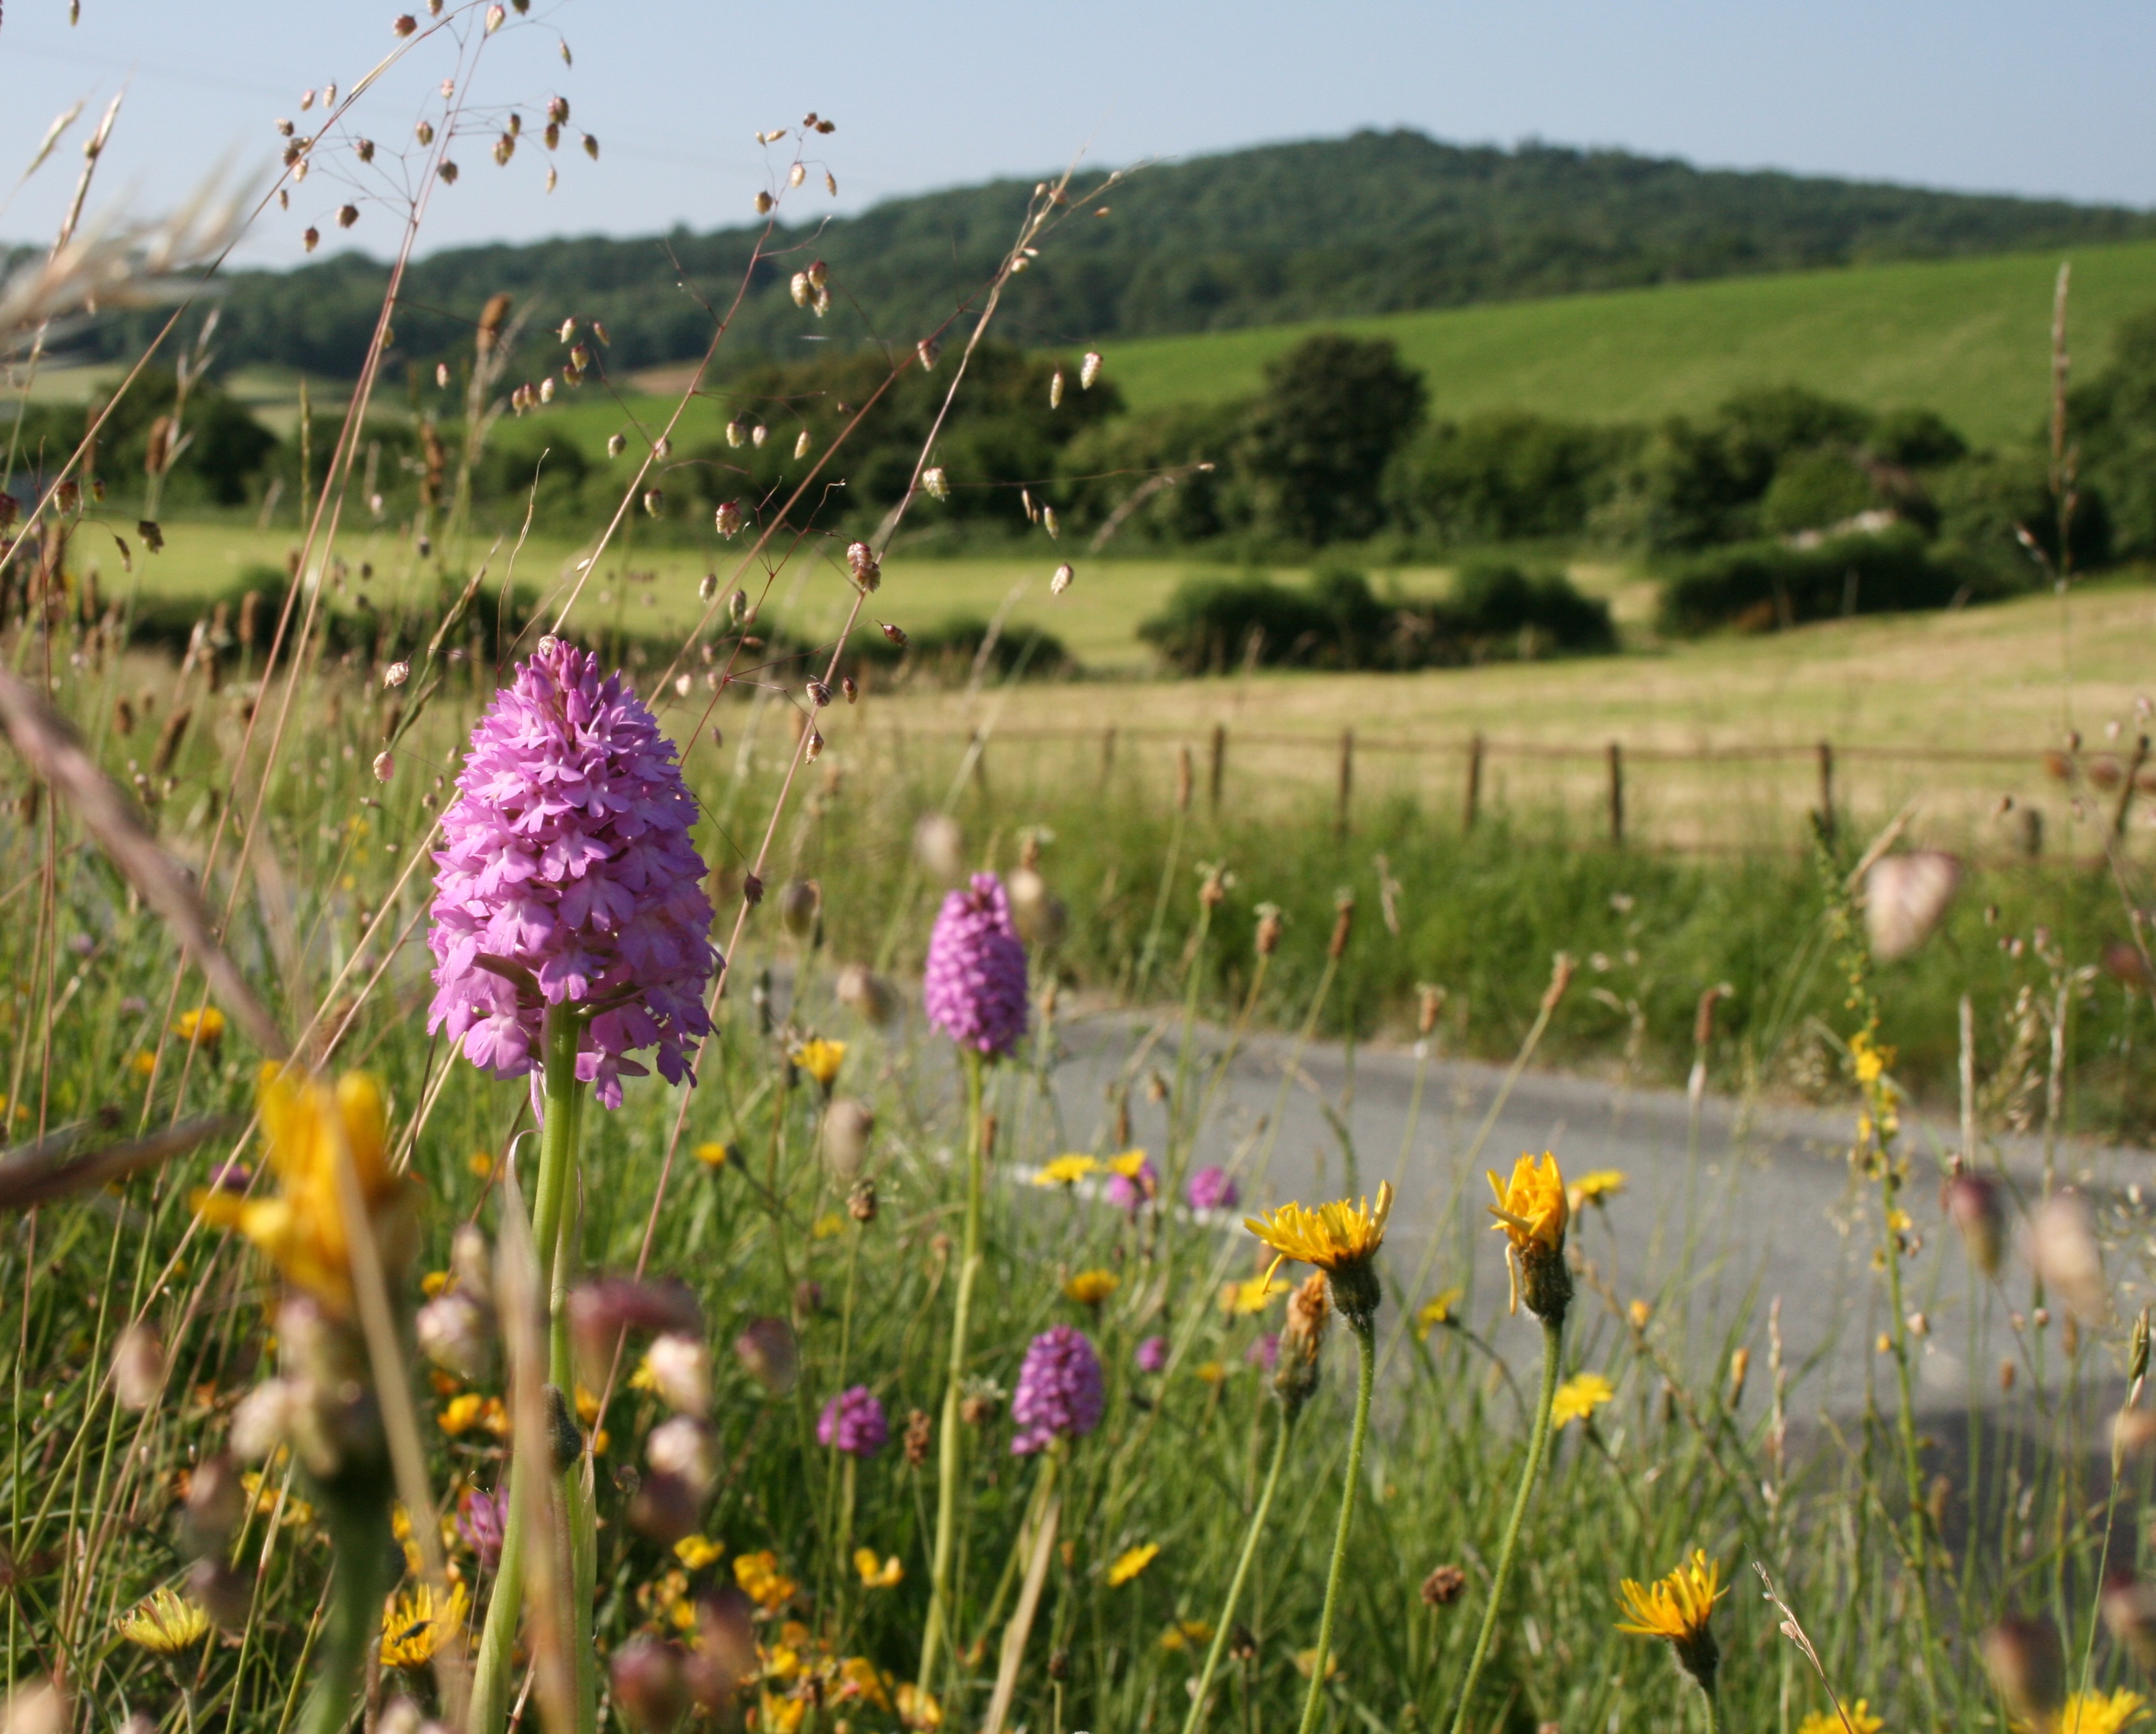 Pyramidal orchid on road verge (c) Dominic Murphy